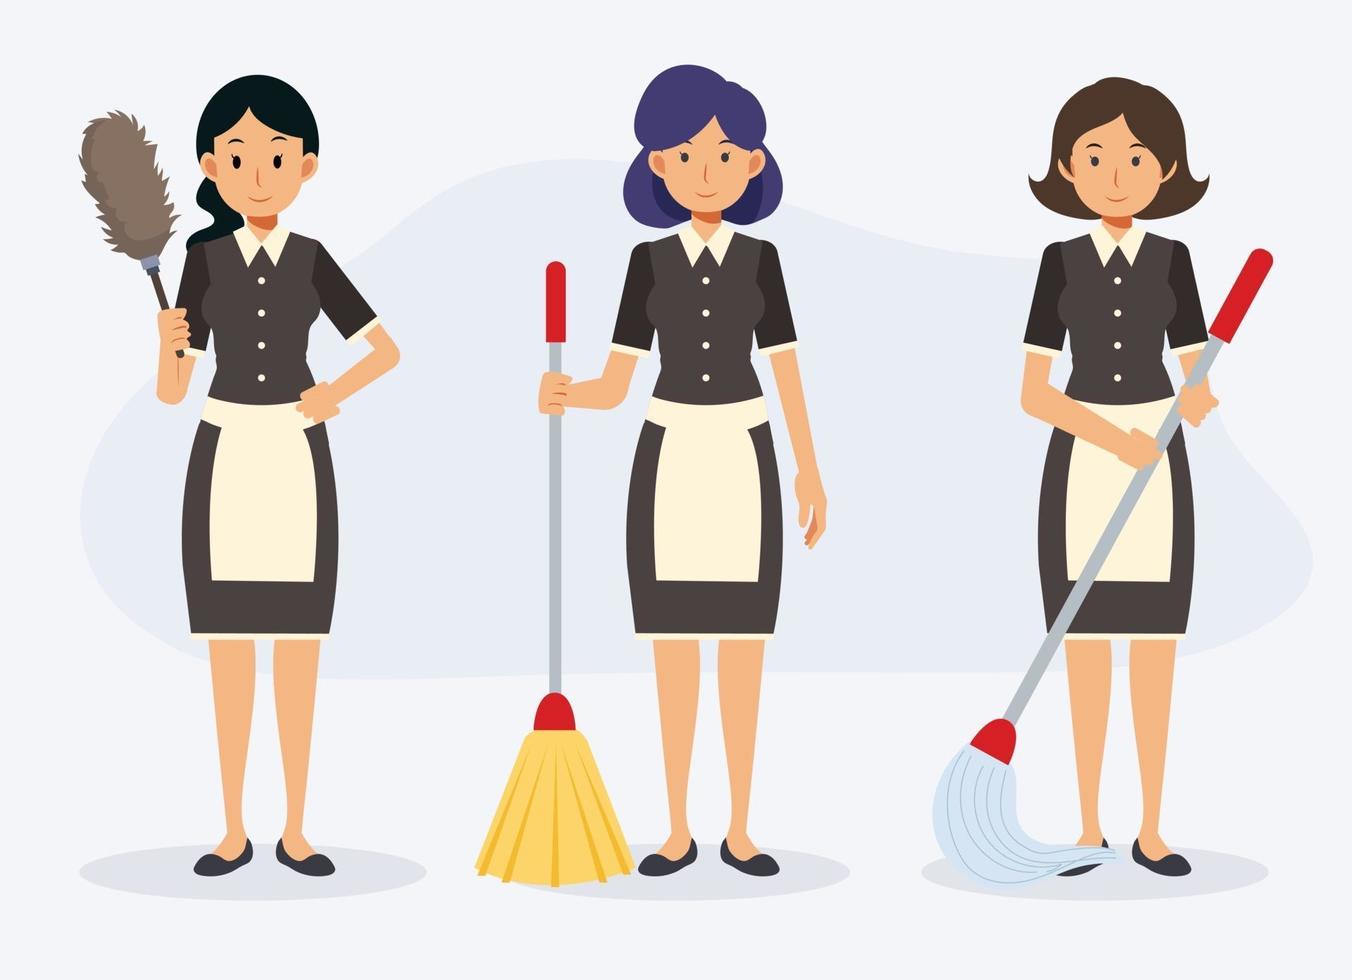 3 of maid with cleaning equipment,broom, mop and feather duster. vector